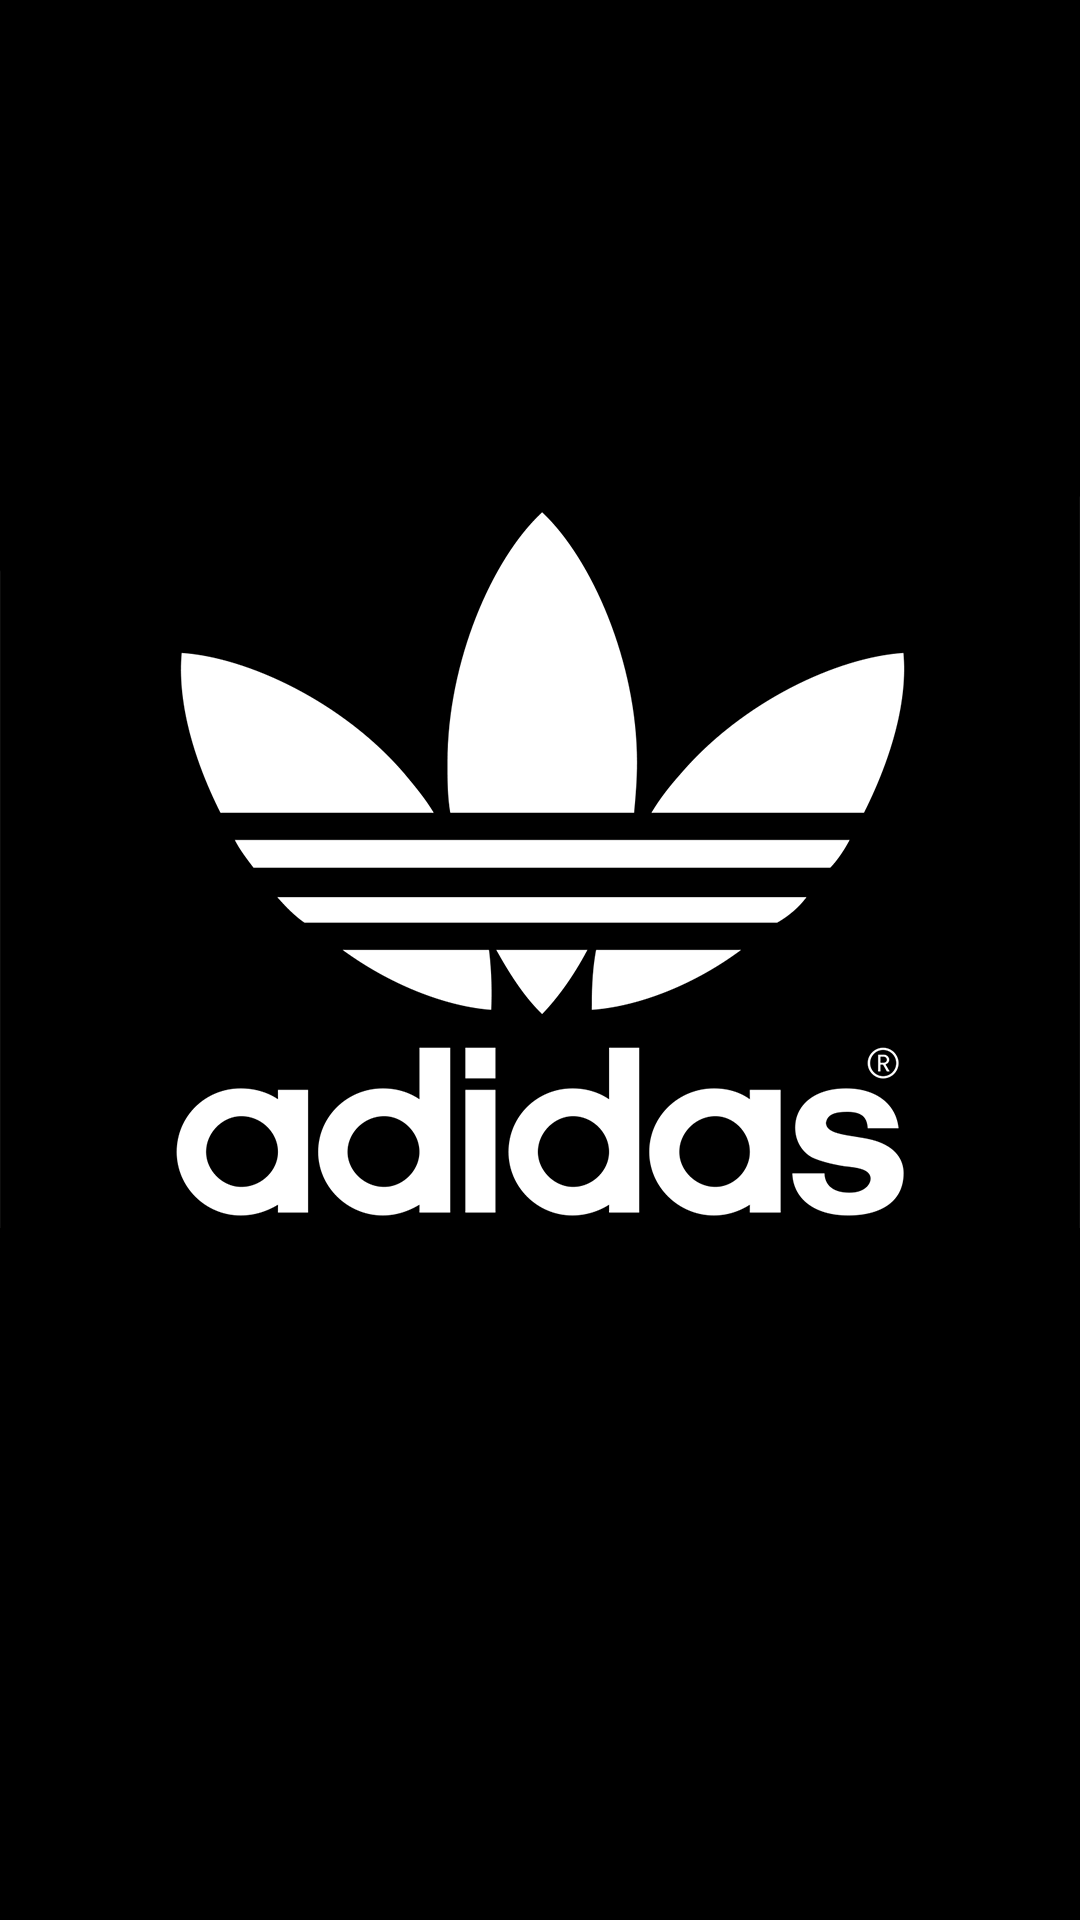 Adidas HD Wallpaper Image In Collection